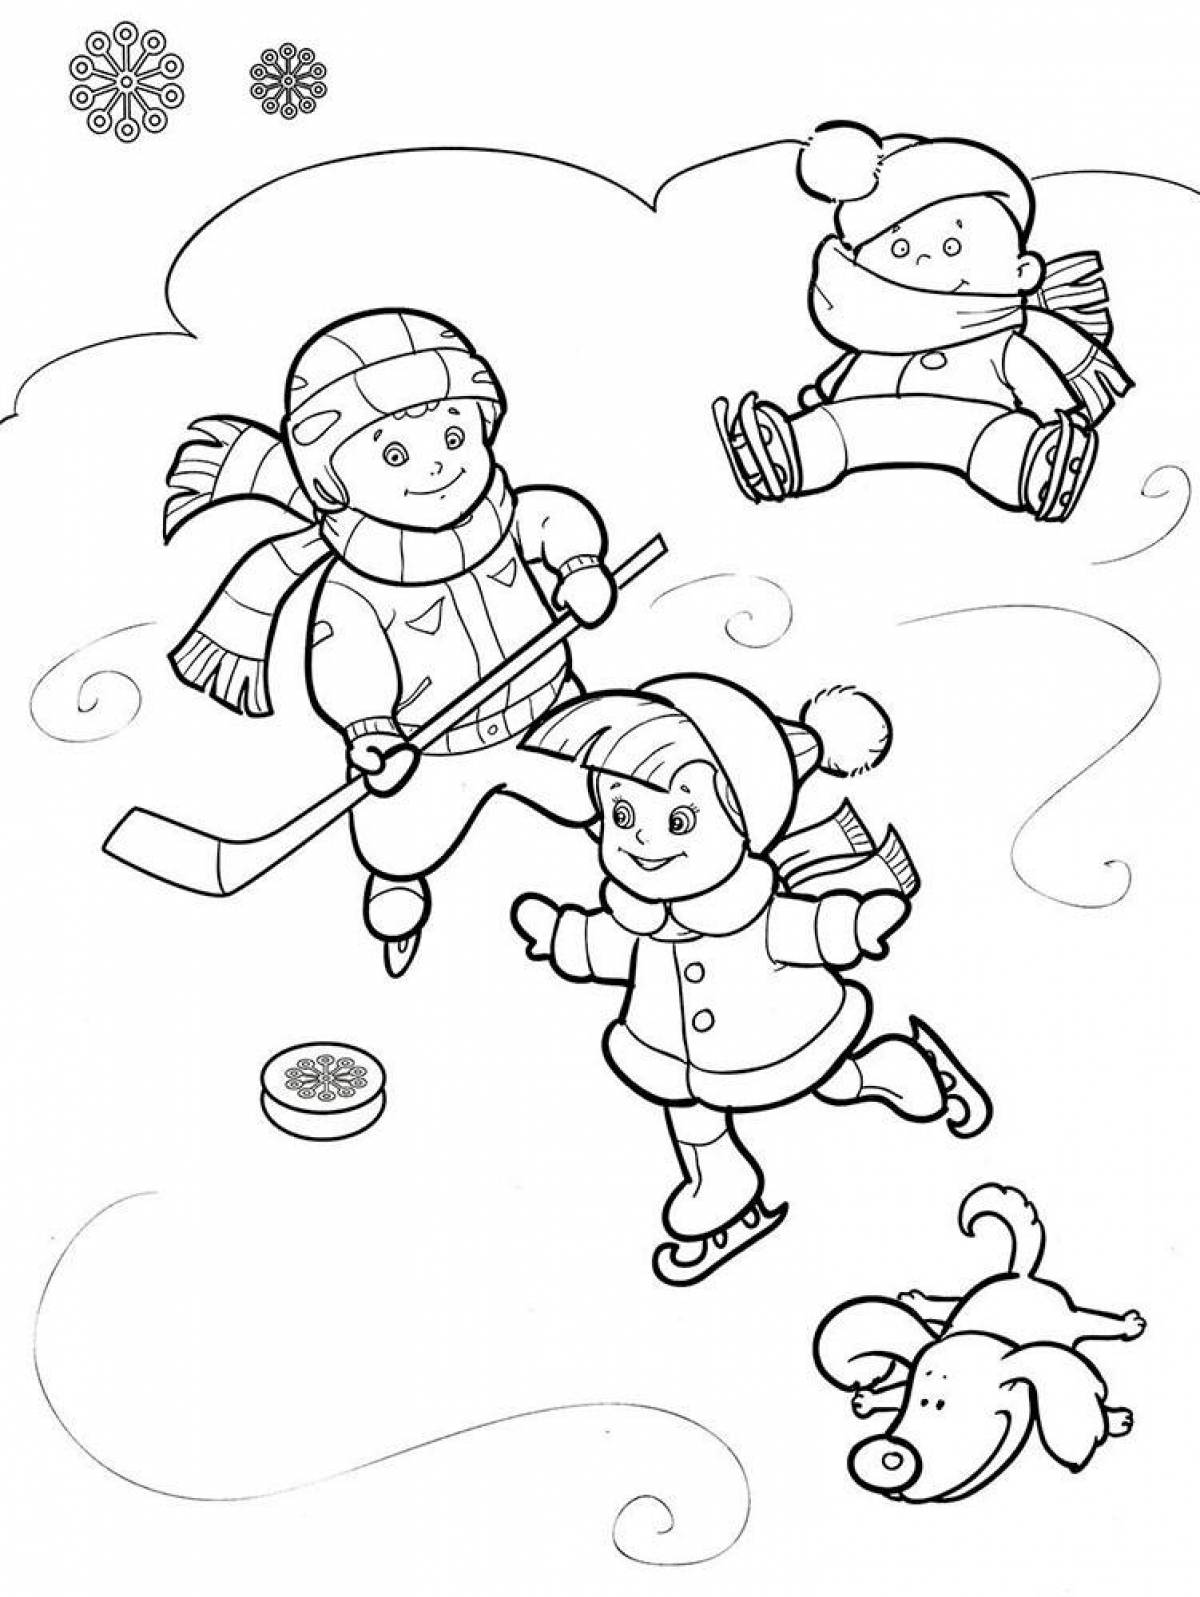 Amazing coloring pages for 3-4 year olds winter sports